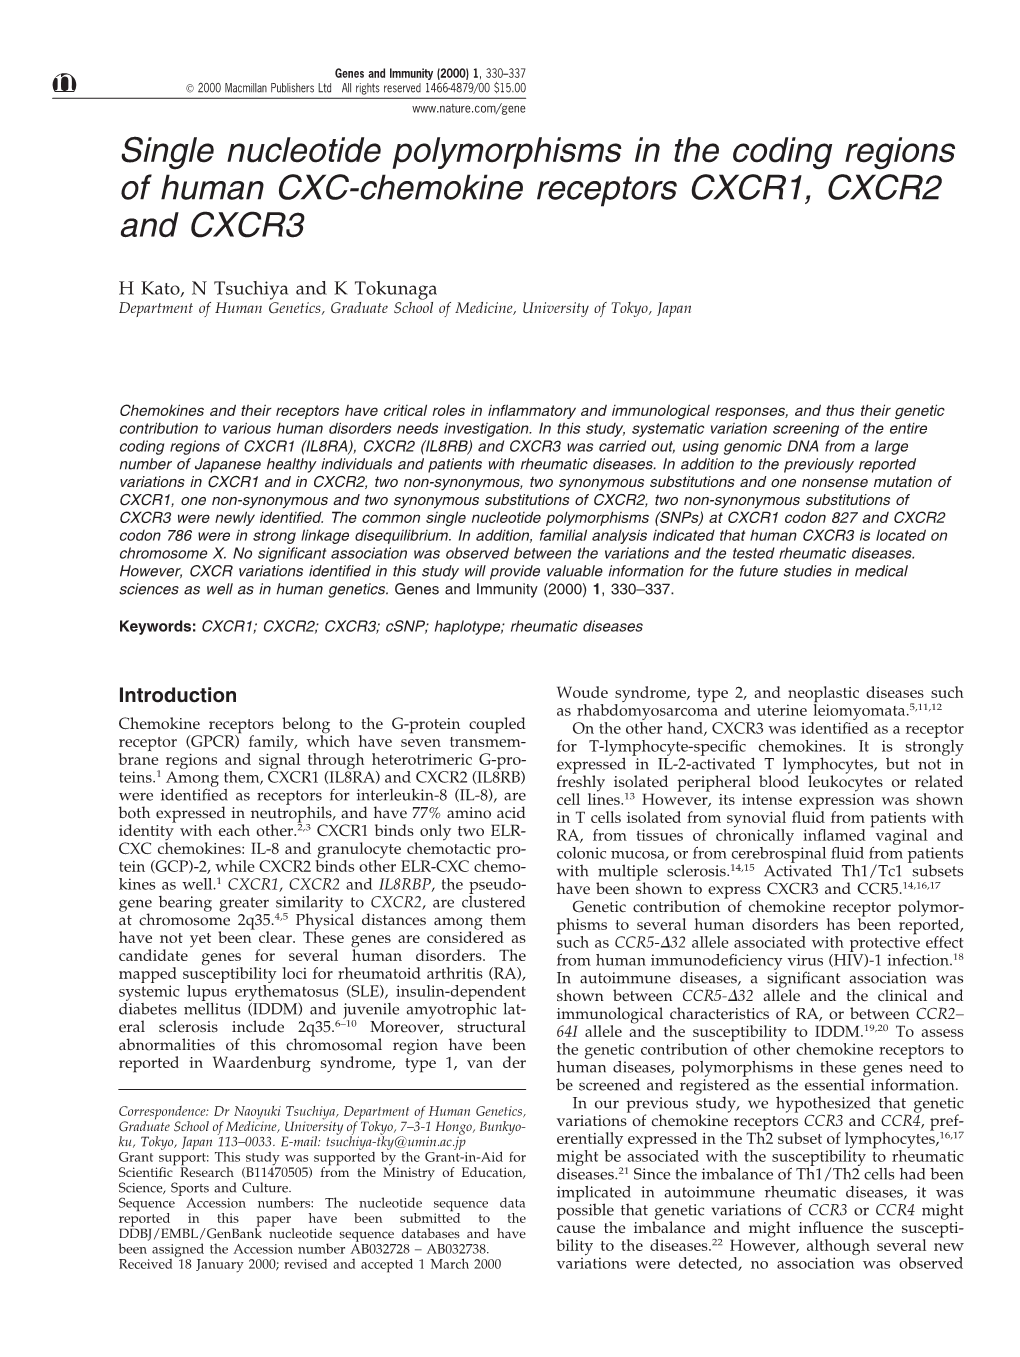 Single Nucleotide Polymorphisms in the Coding Regions of Human CXC-Chemokine Receptors CXCR1, CXCR2 and CXCR3